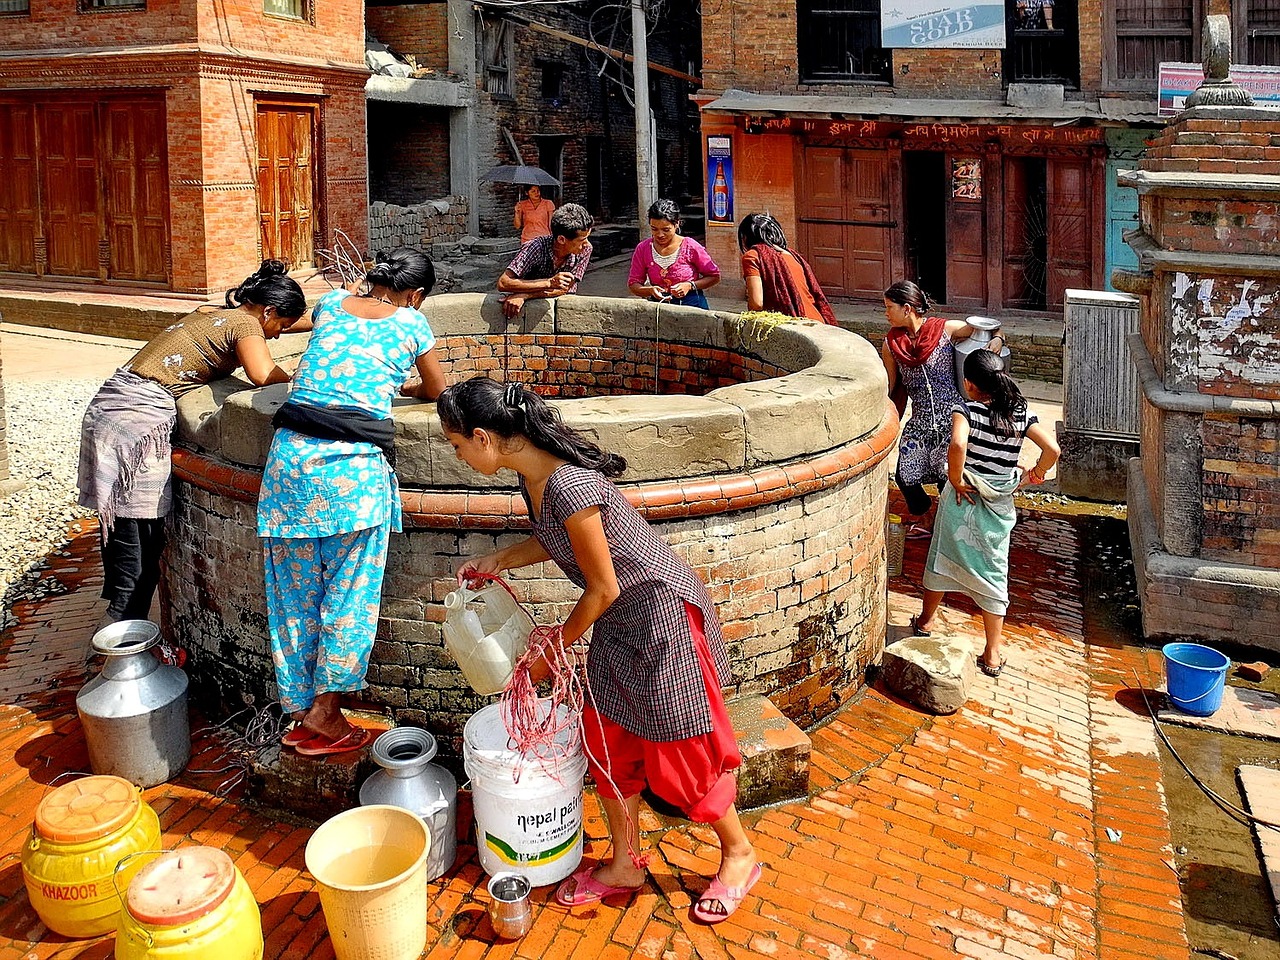 Women washing clothes in well - Nepal